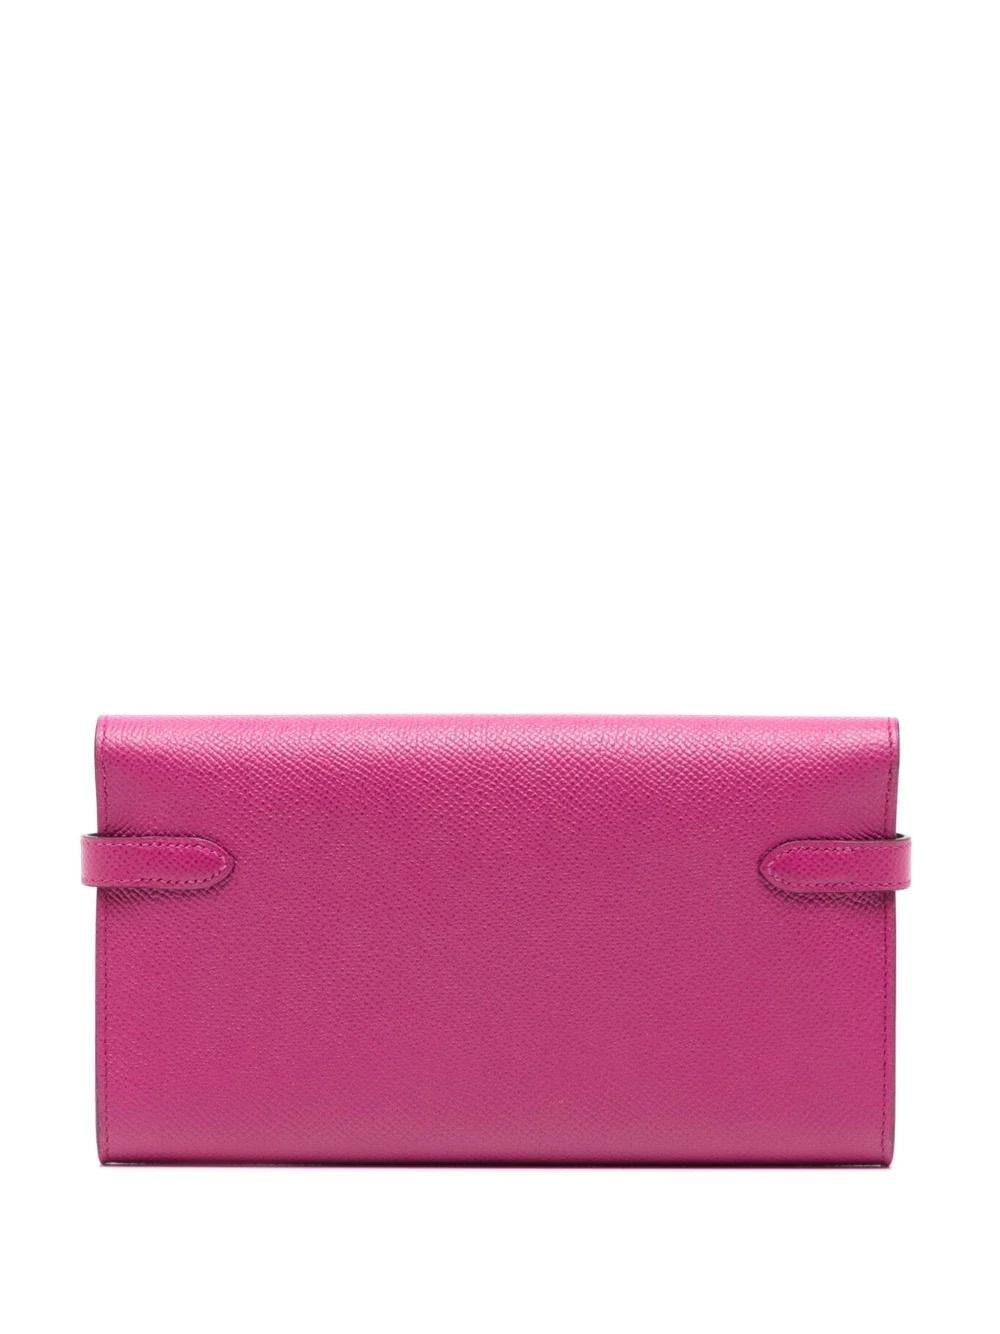 This Kelly Classic Wallet by Hermès is a timeless and elegant piece for your collection. It has been handcrafted in a magenta epsom leather and is in excellent condition. Featuring the iconic Hermès clasp and palladium hardware, this wallet can be